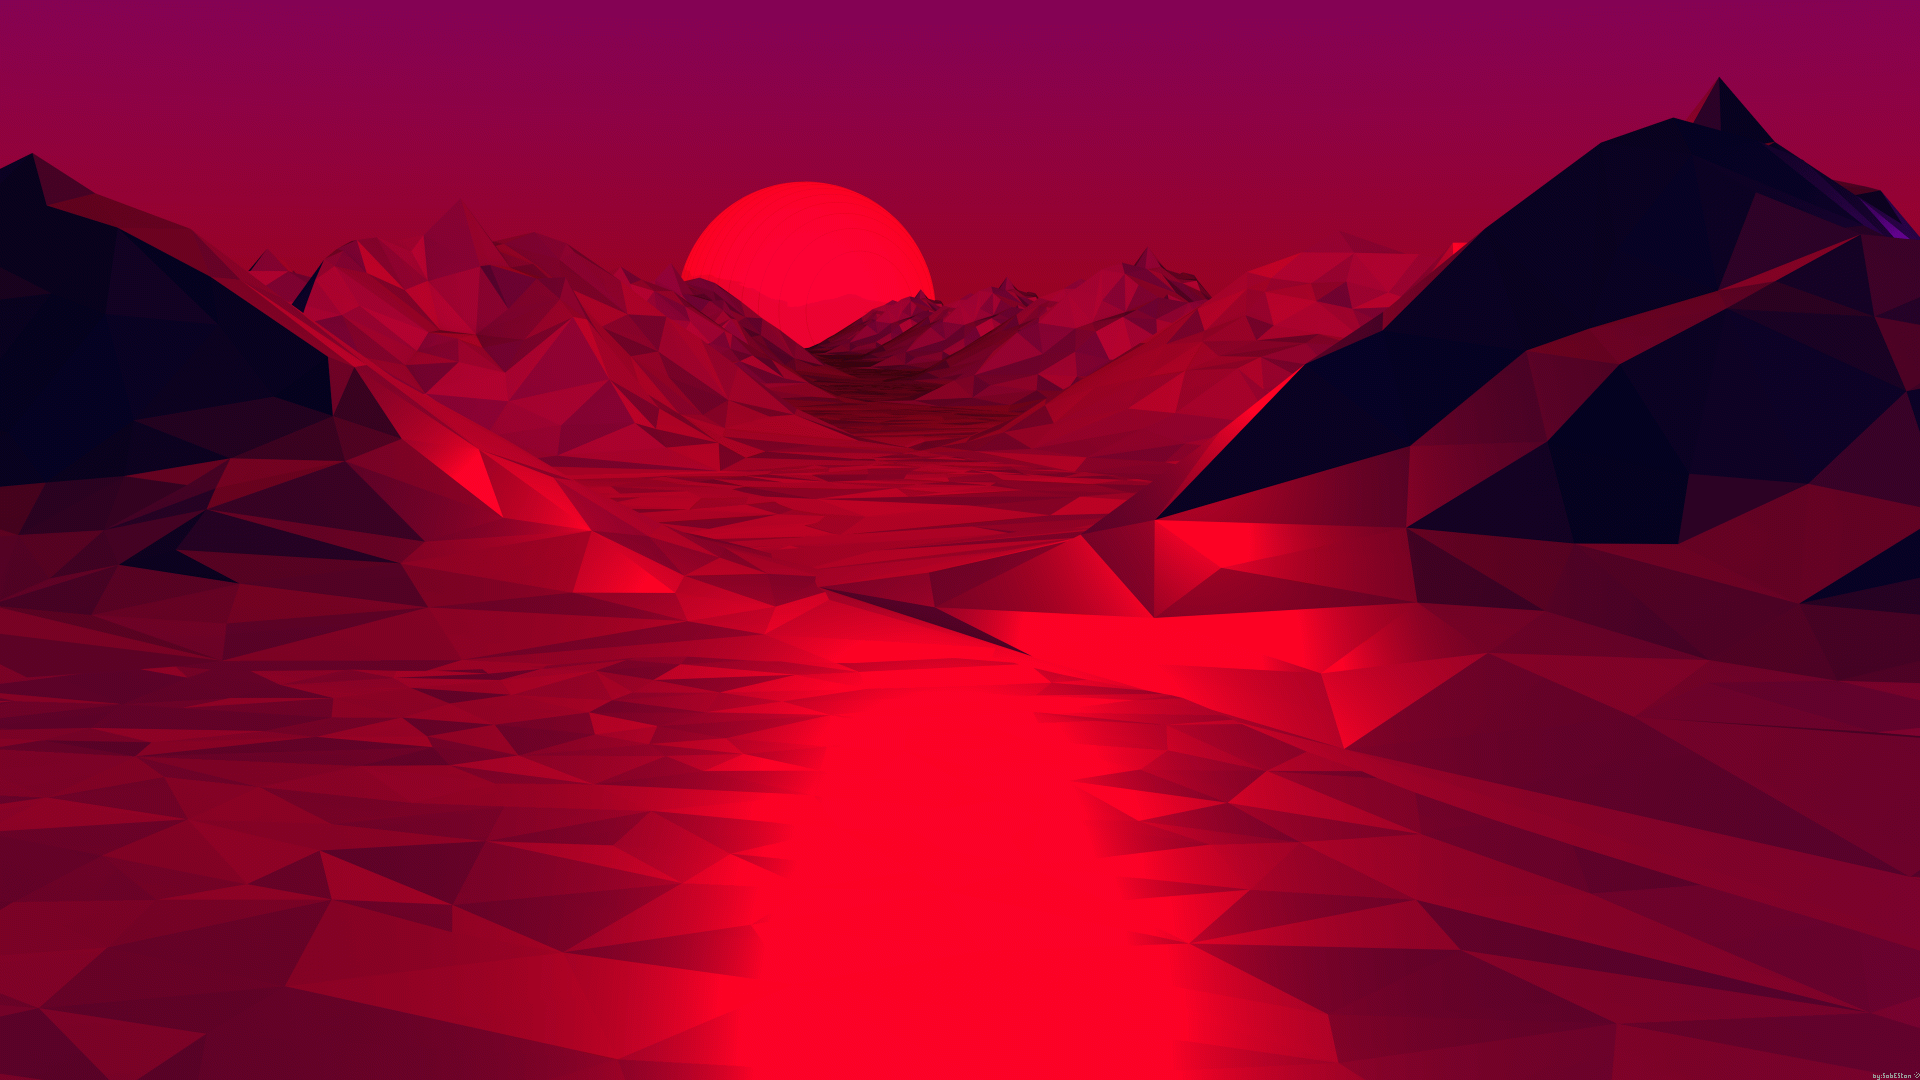 Free download Red Aesthetic Computer Wallpapers Top Red Aesthetic